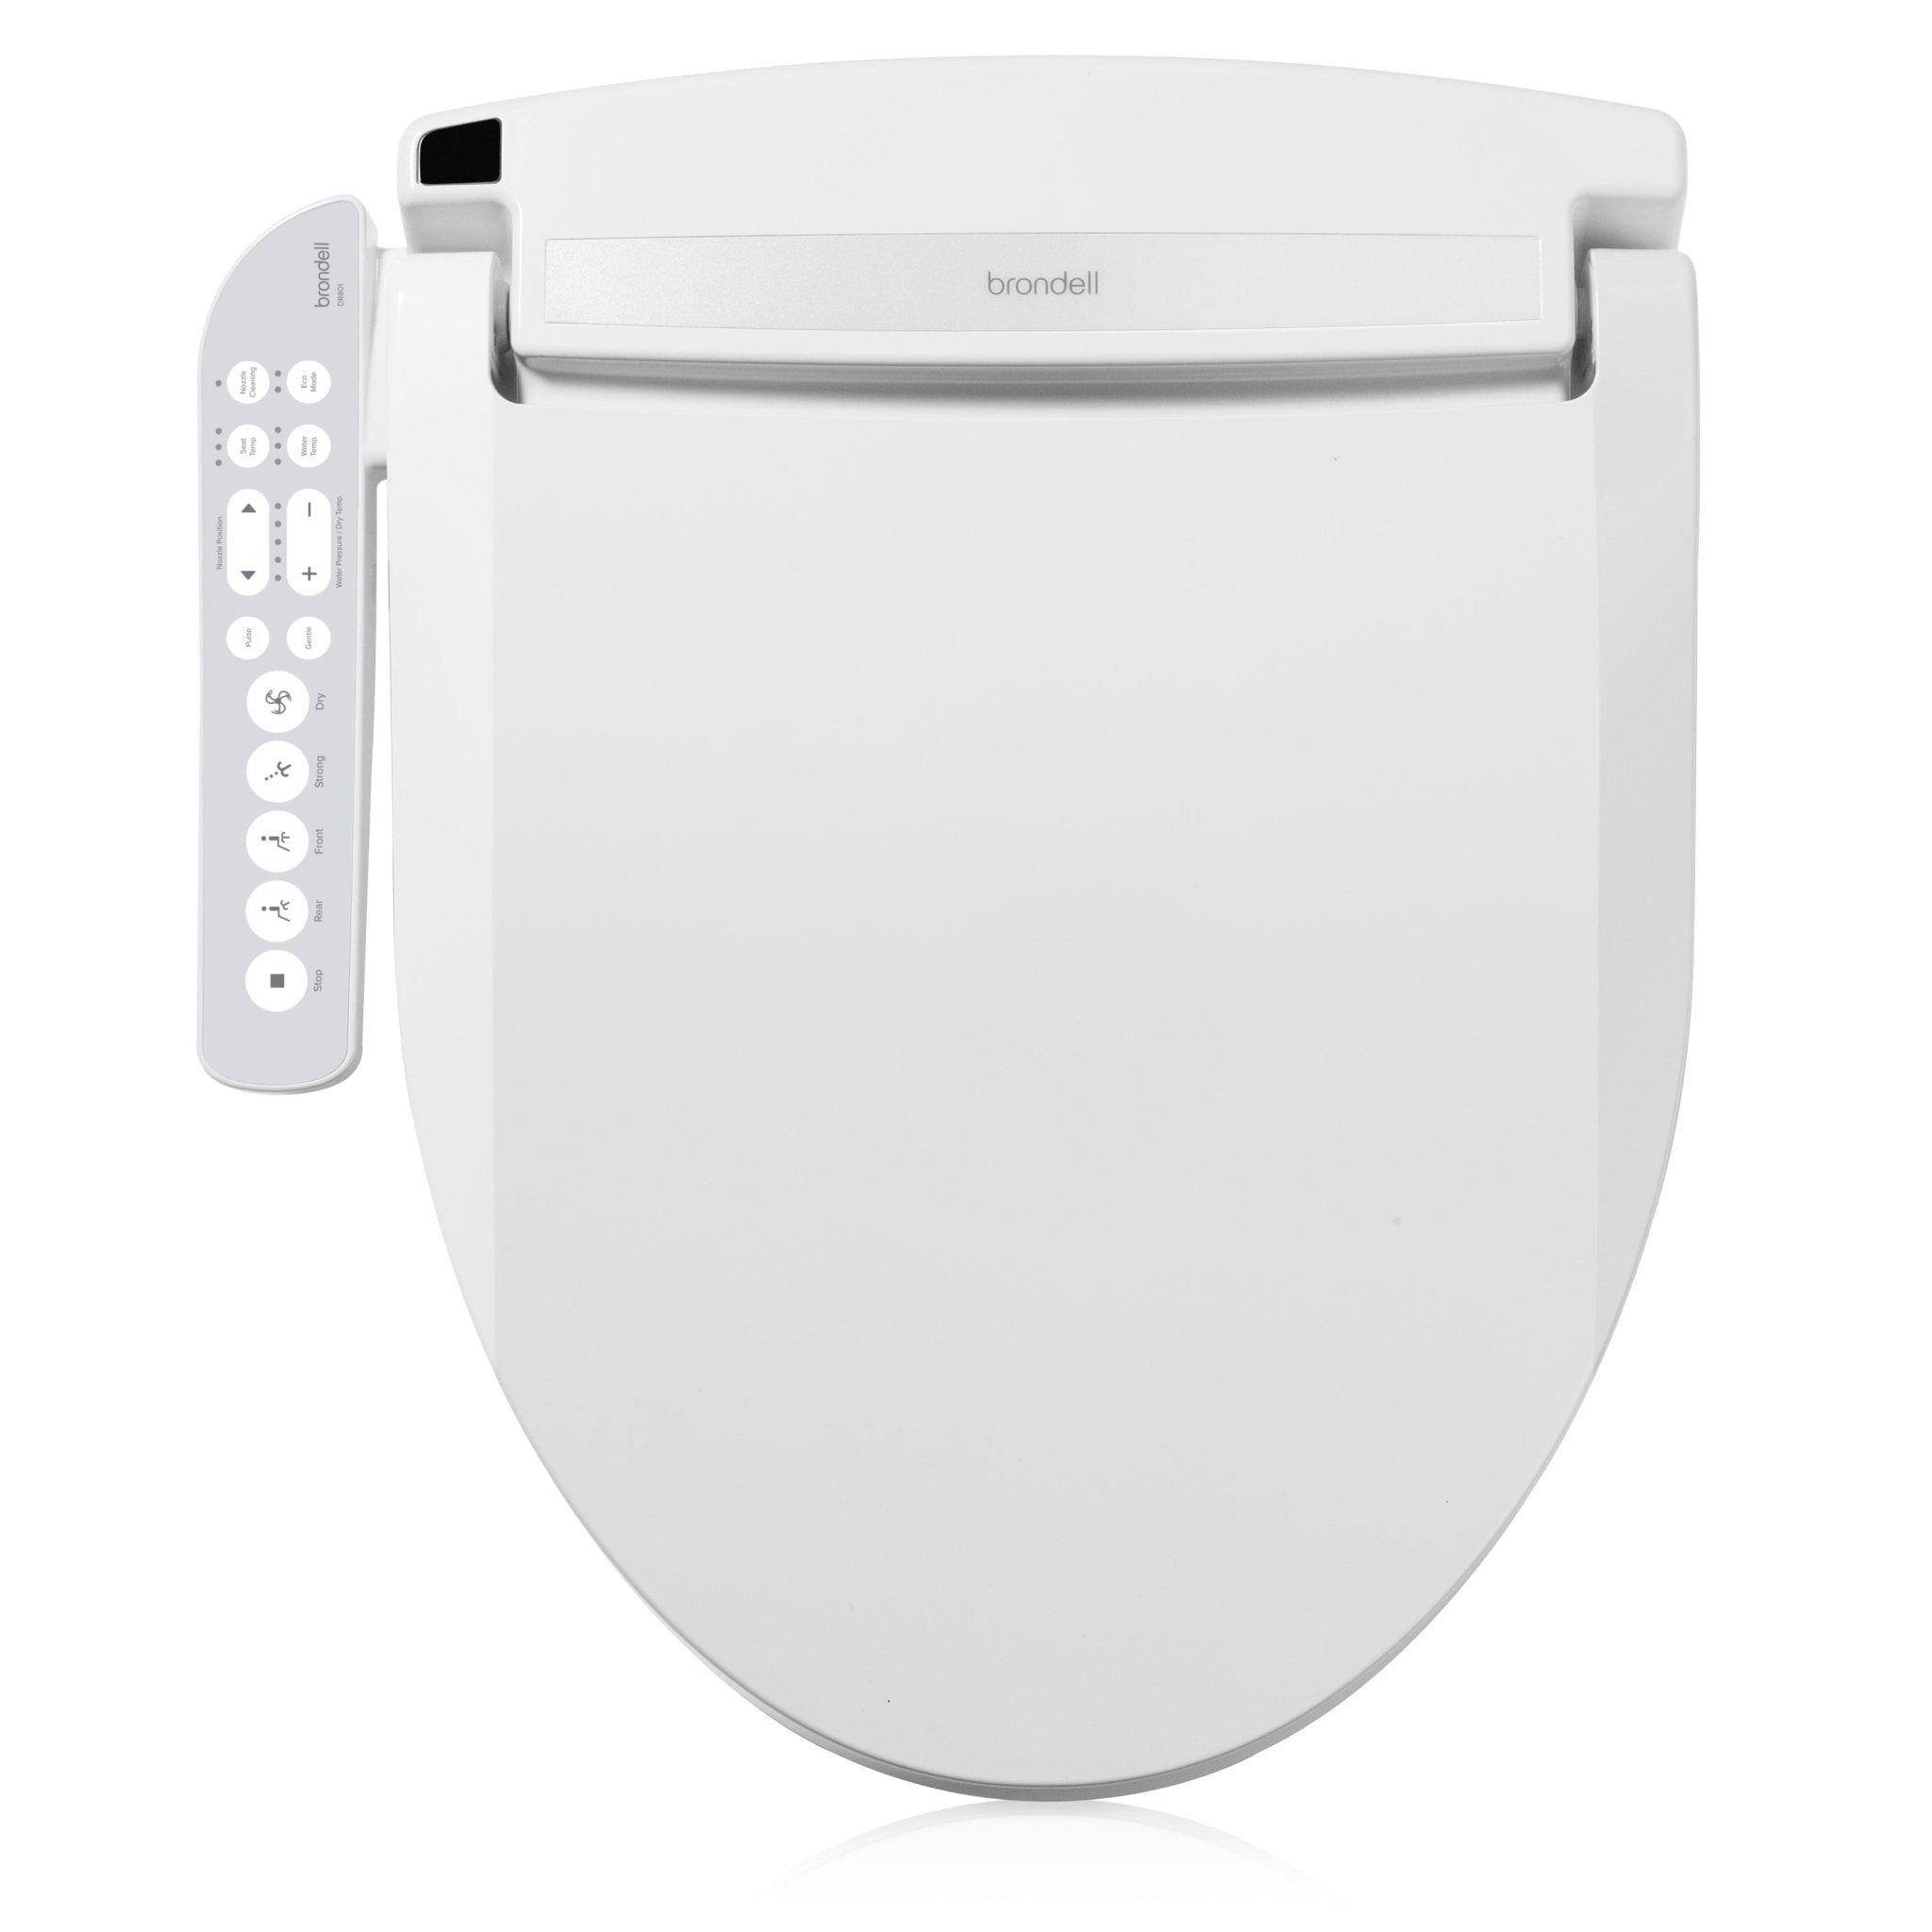 Swash Select DR801 Sidearm Bidet Heated Seat with Warm Air Dryer and Deodorizer, Round White DR801-RW - Molaix - Molaix819911015085SWASH SELECT BIDET SEATSDR801-RW